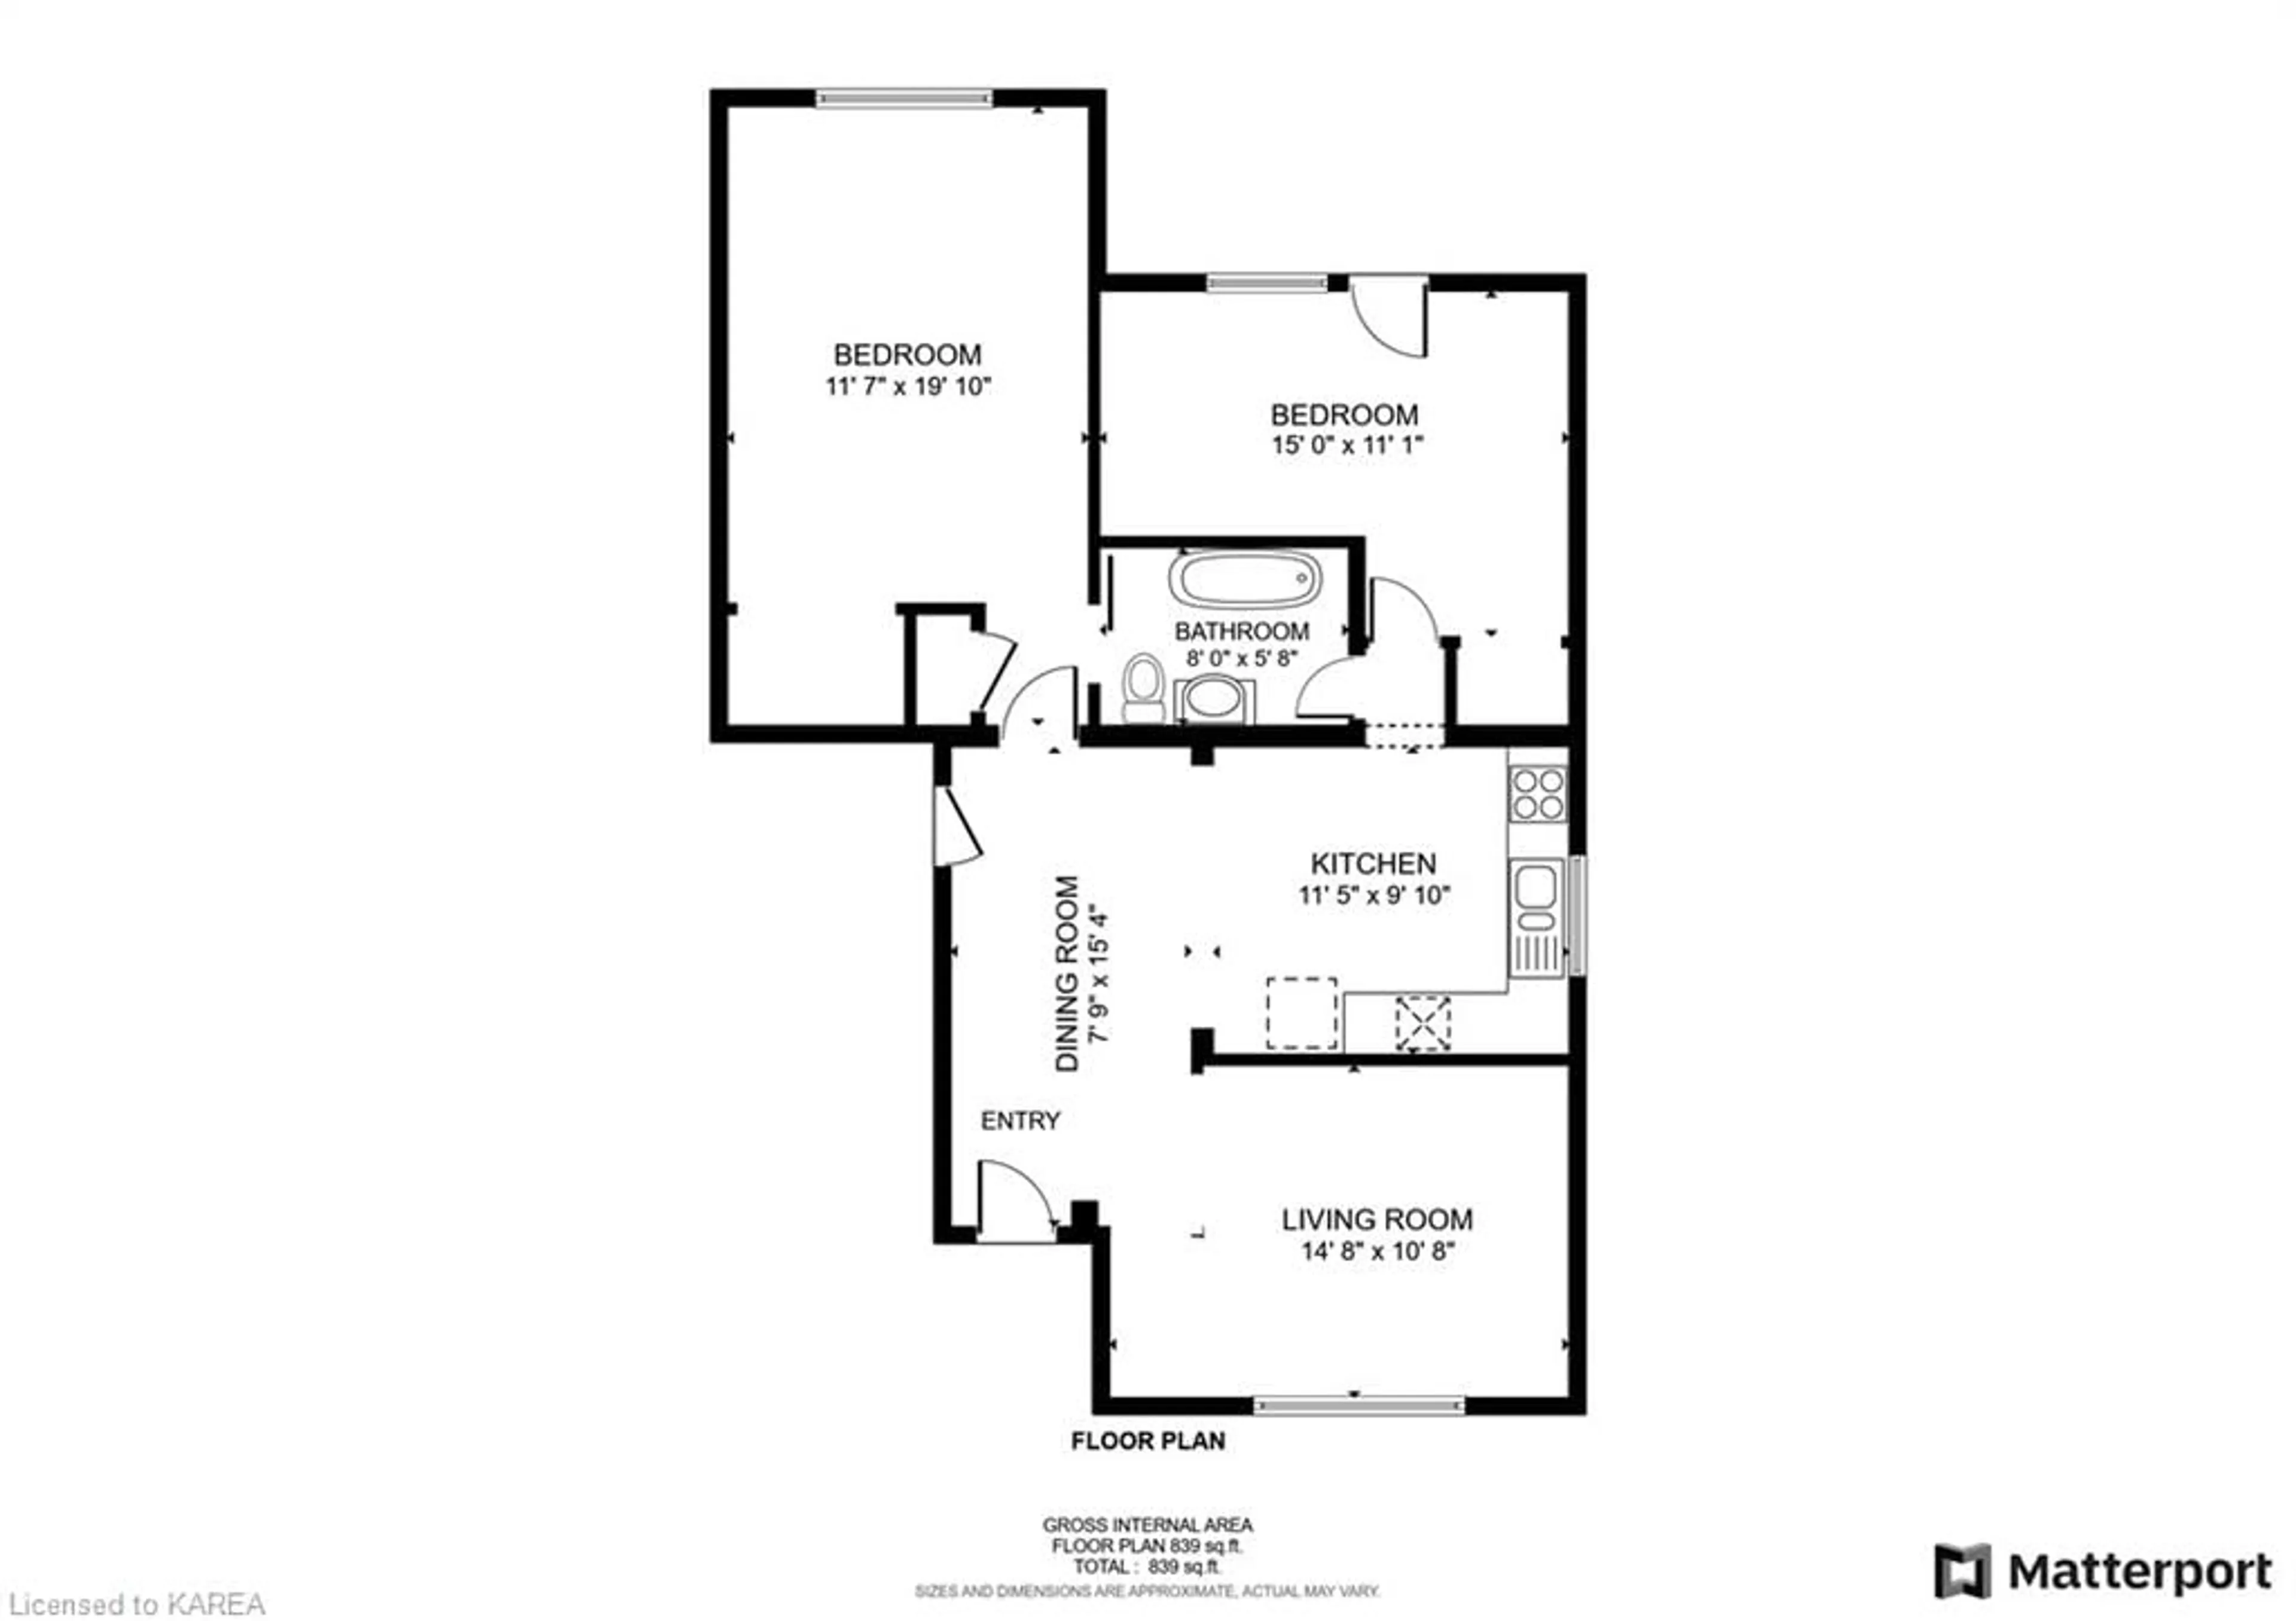 Floor plan for 423 Palace Rd, Kingston Ontario K7L 4T5